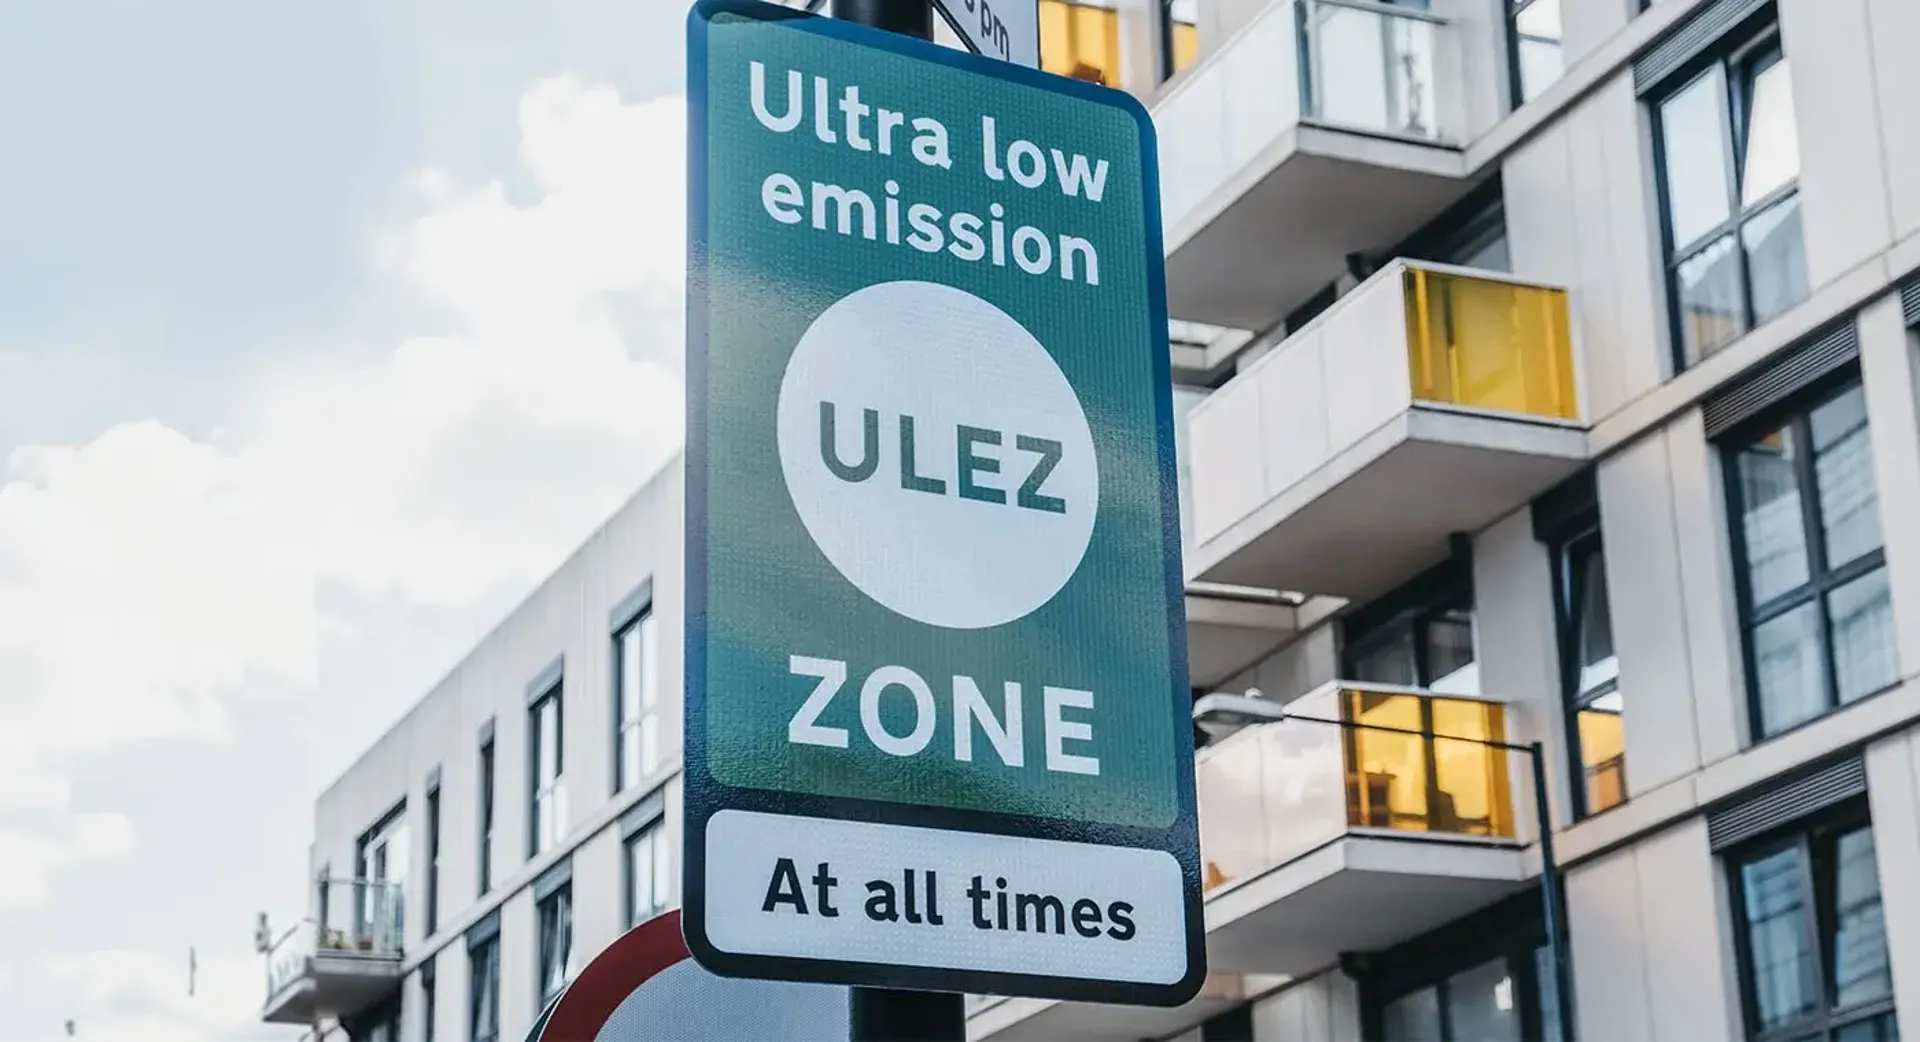 A sign displaying "Ultra Low Emission Zone at all times" indicating a restricted area for vehicles with minimal emissions.